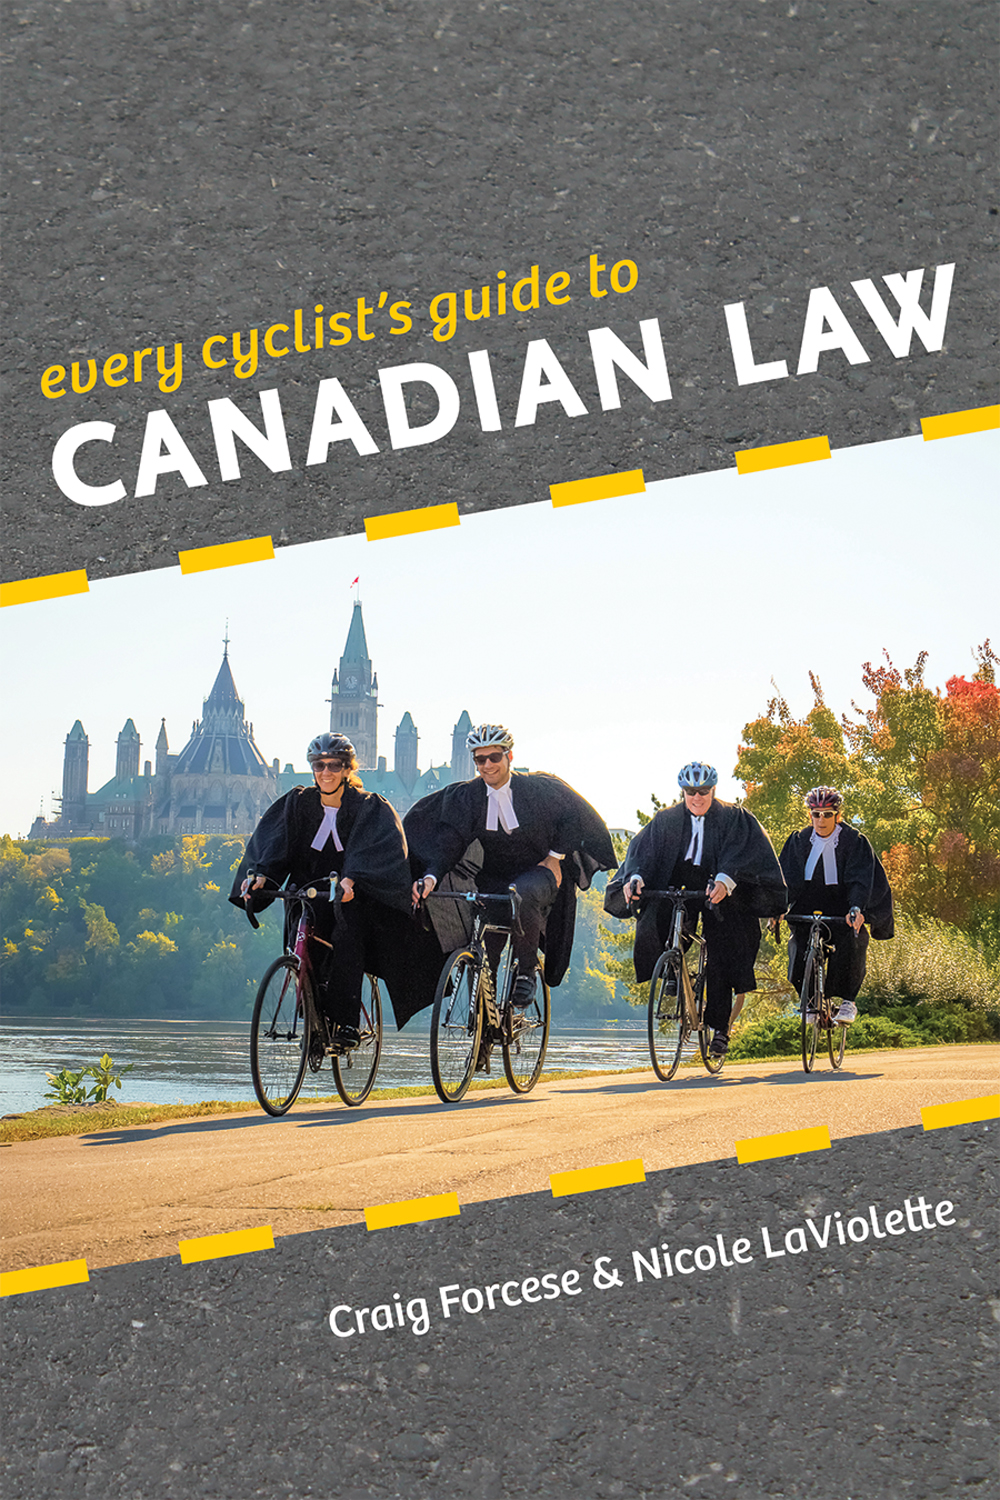 Every Cyclist's Guide to Canadian Law